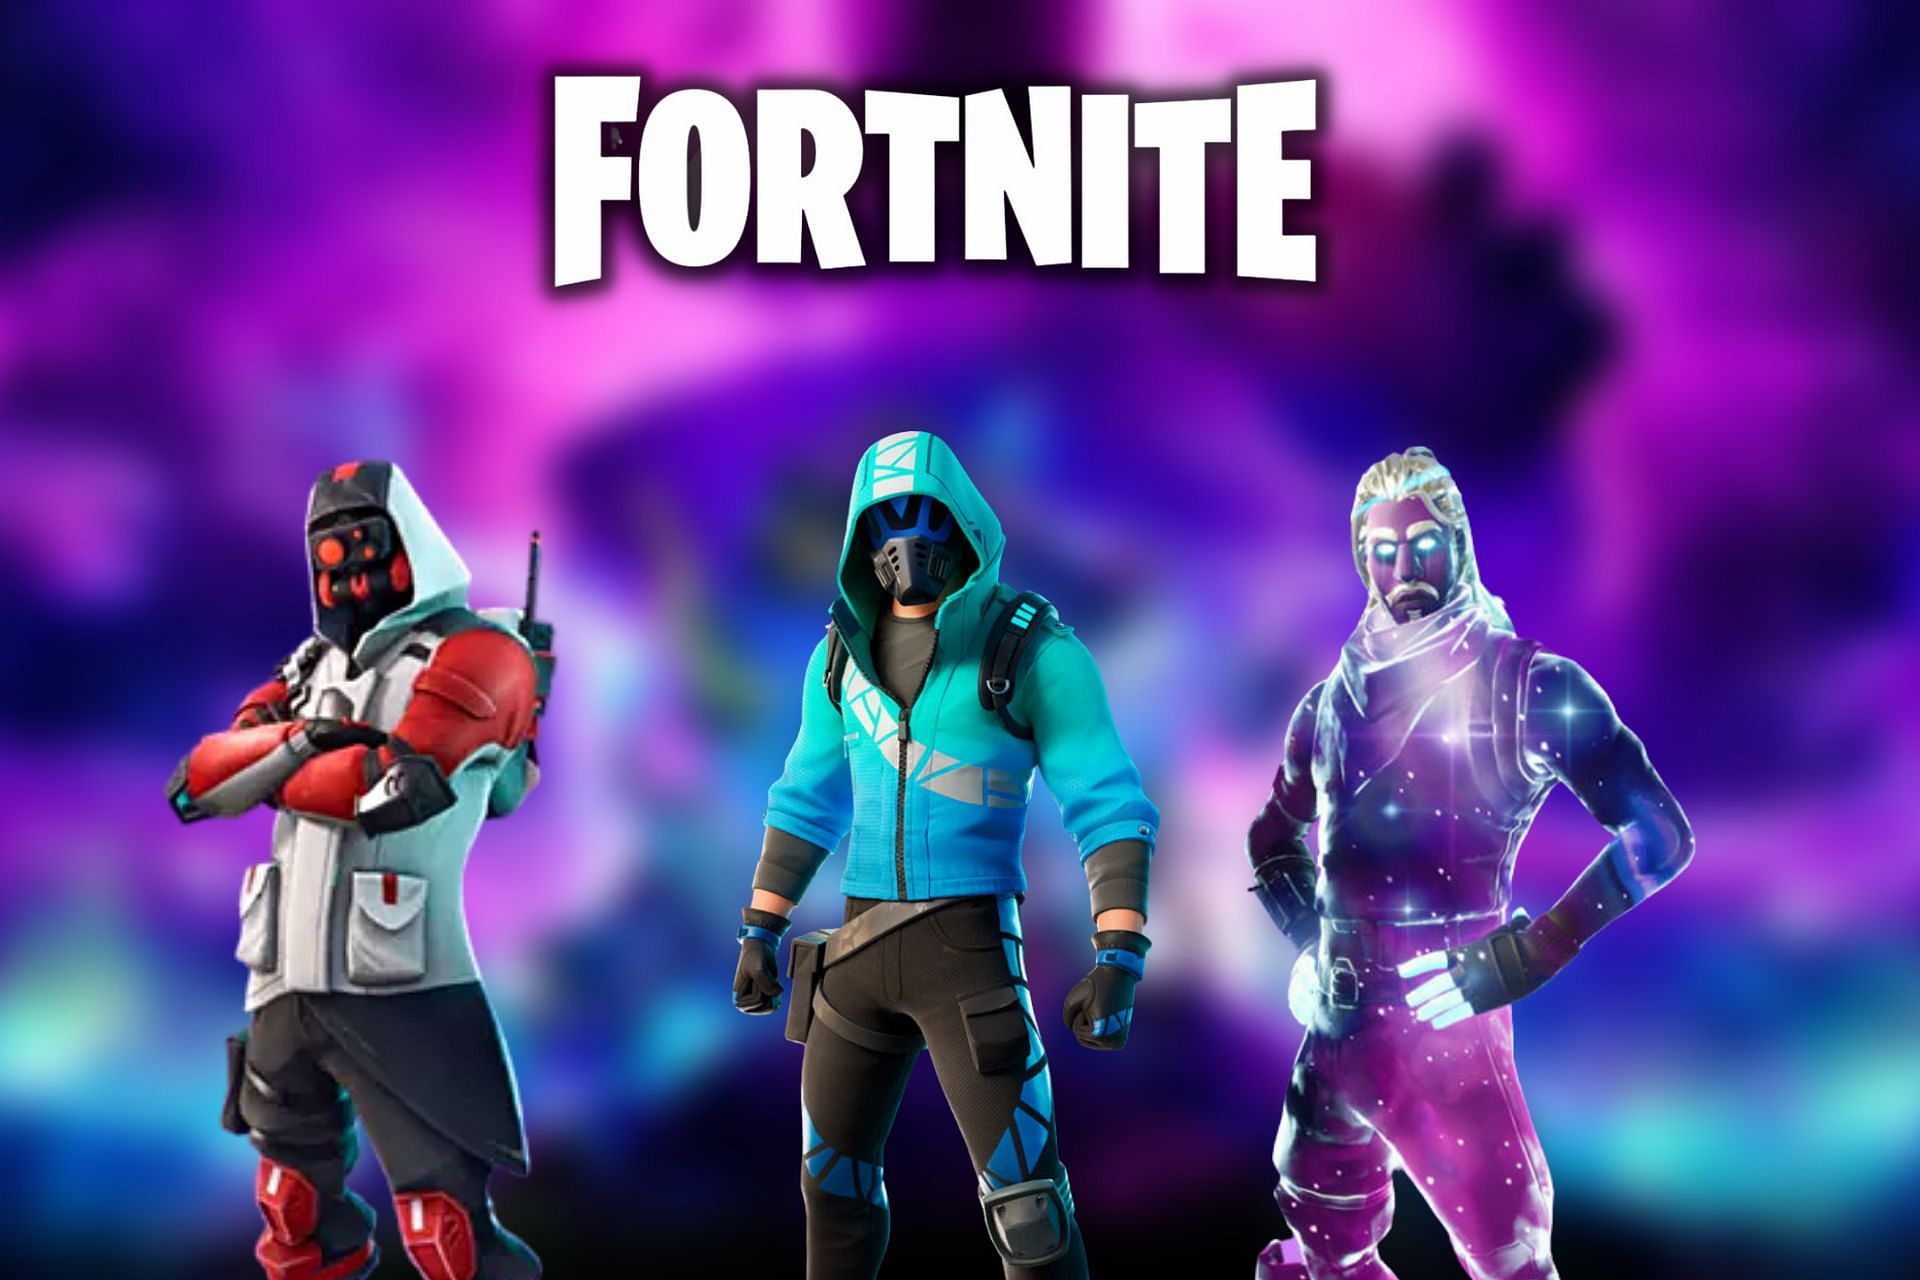 The Galaxy, Double Helix, and Surf Strider skins in Fortnite (Image via Sportskeeda)